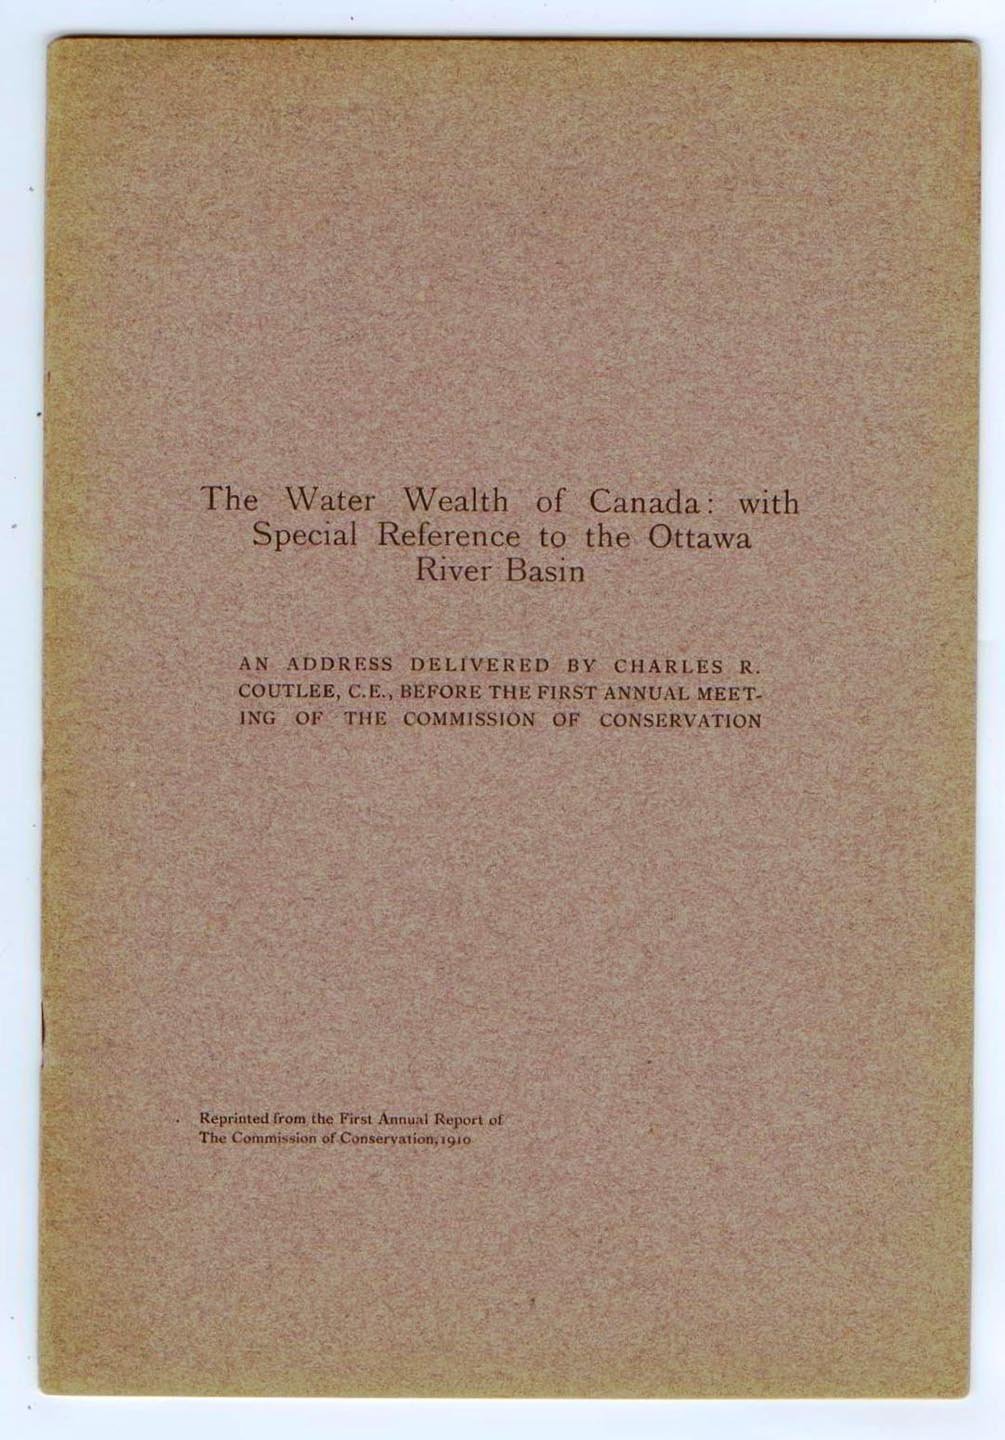 The Water Wealth of Canada: with Special Reference to the Ottawa River Basin